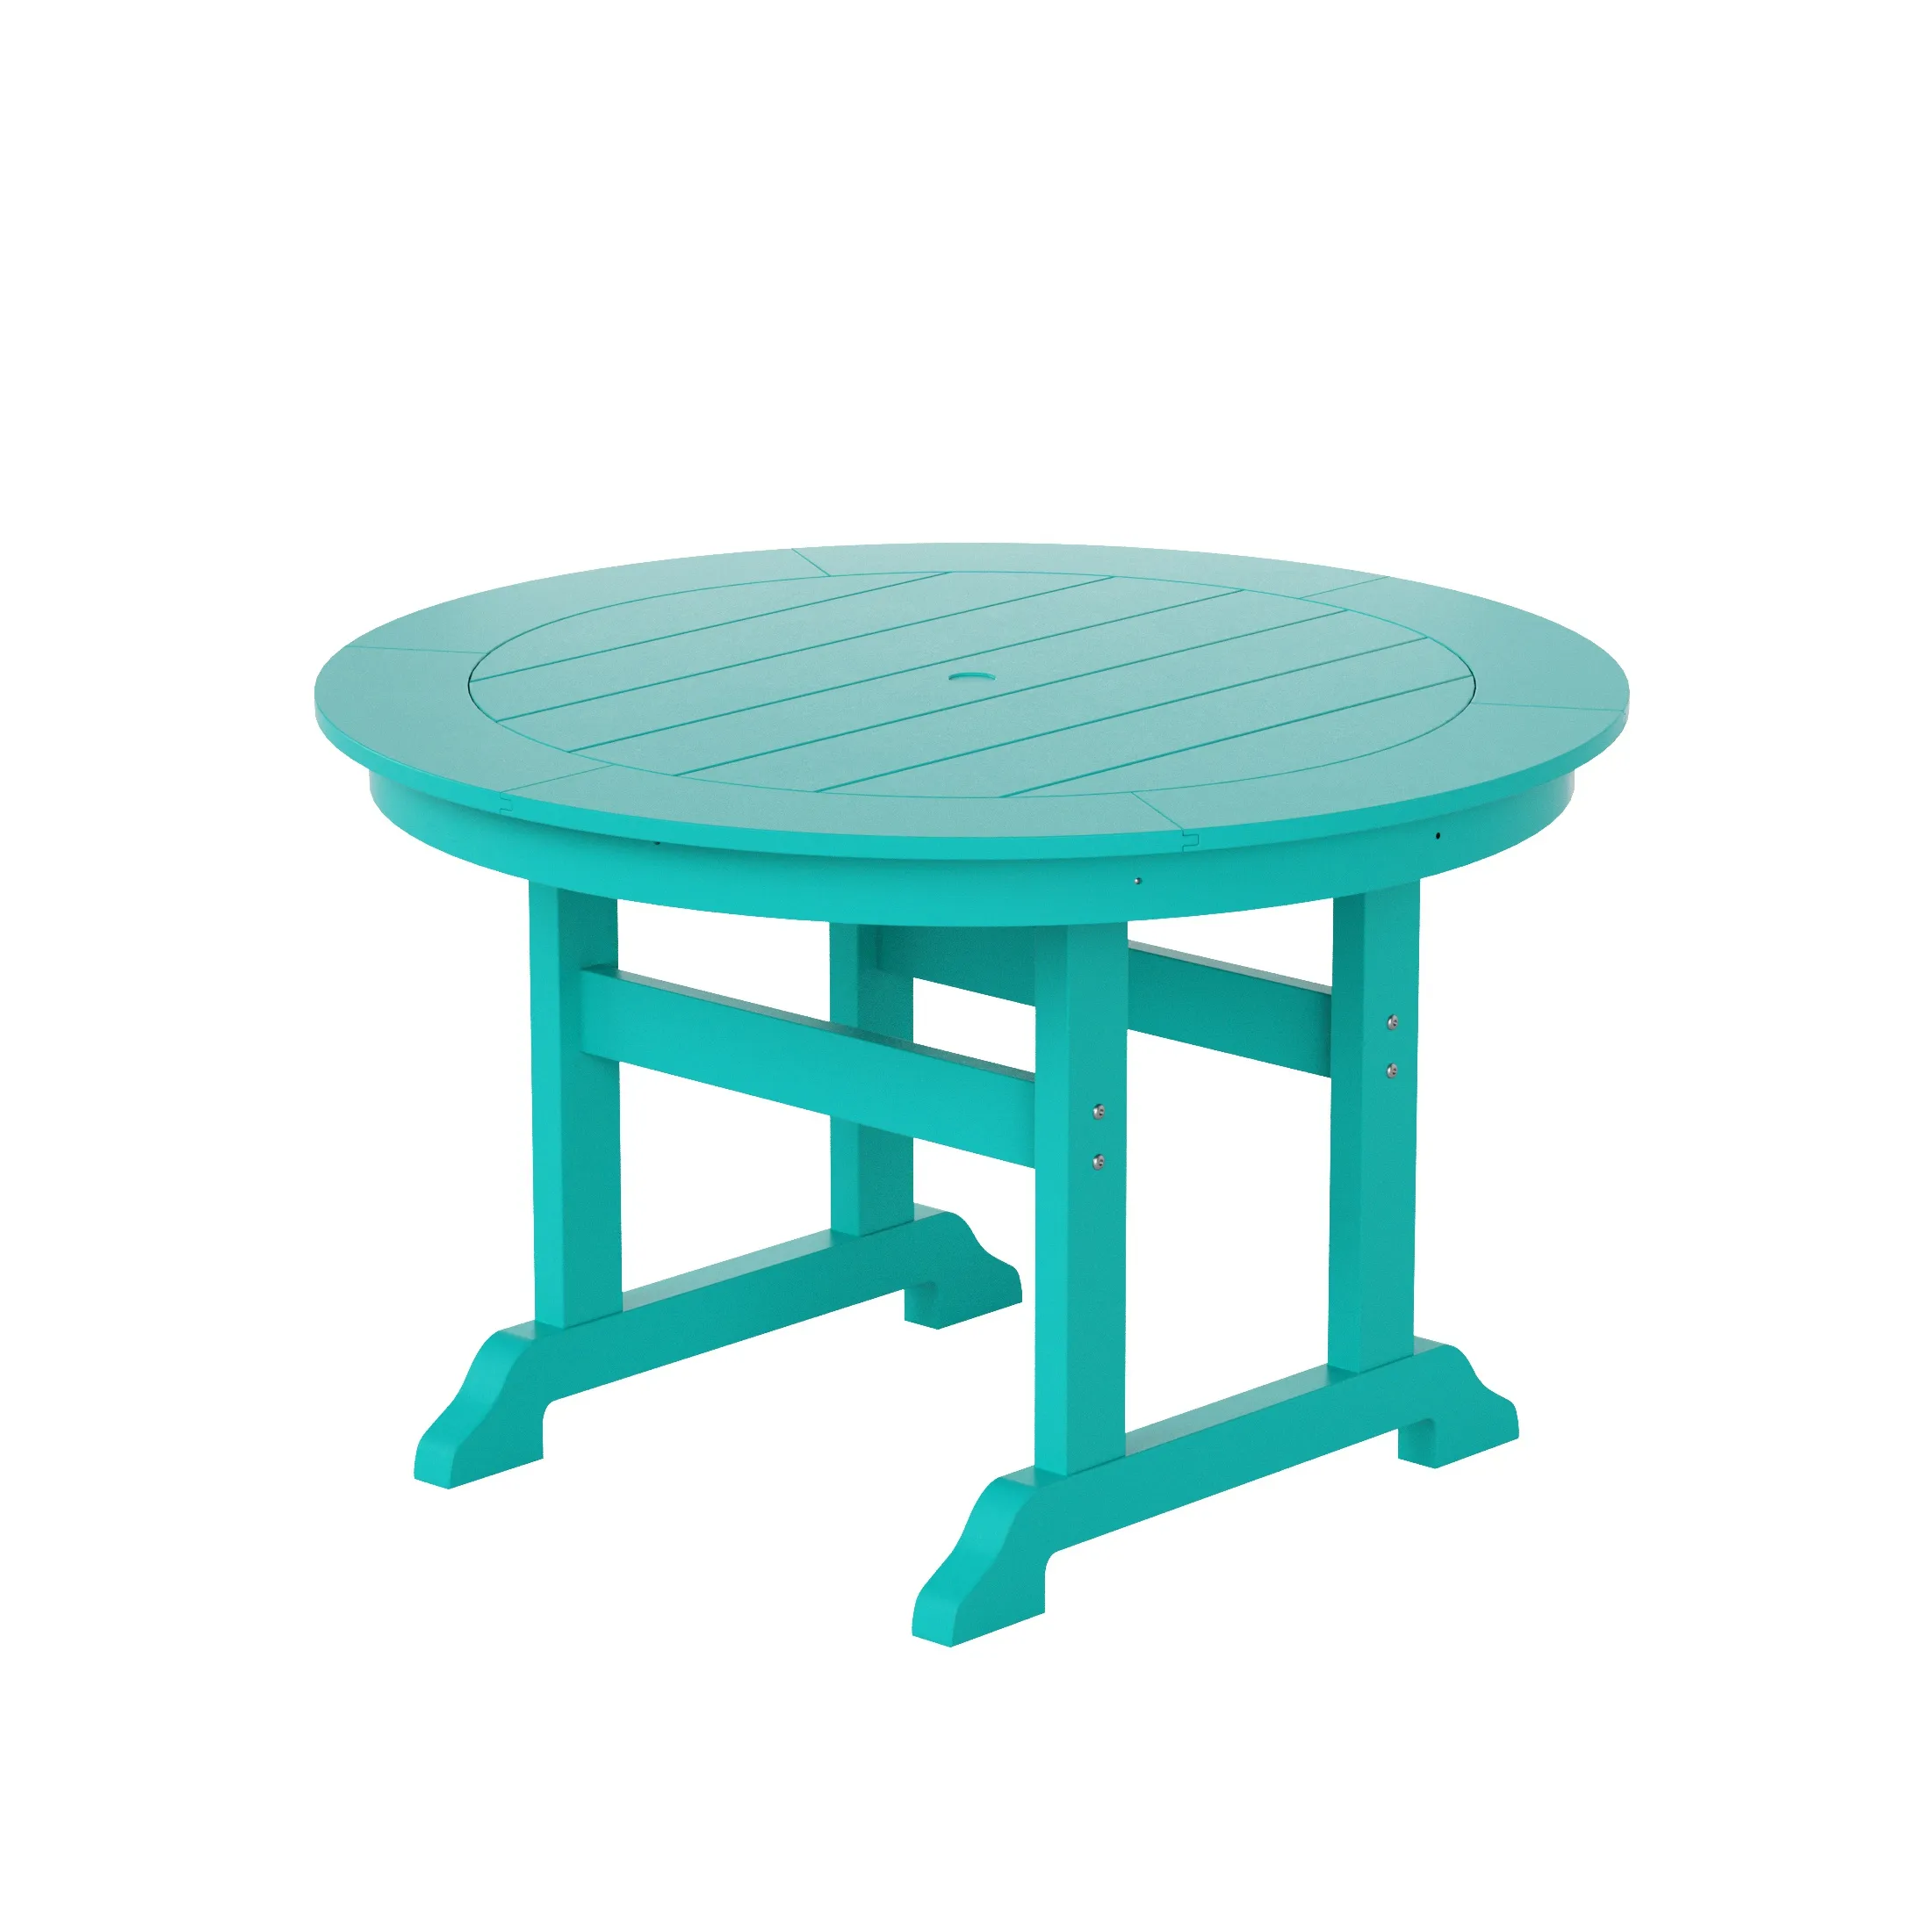 WestinTrends 47" Round Outdoor Patio Dining Table